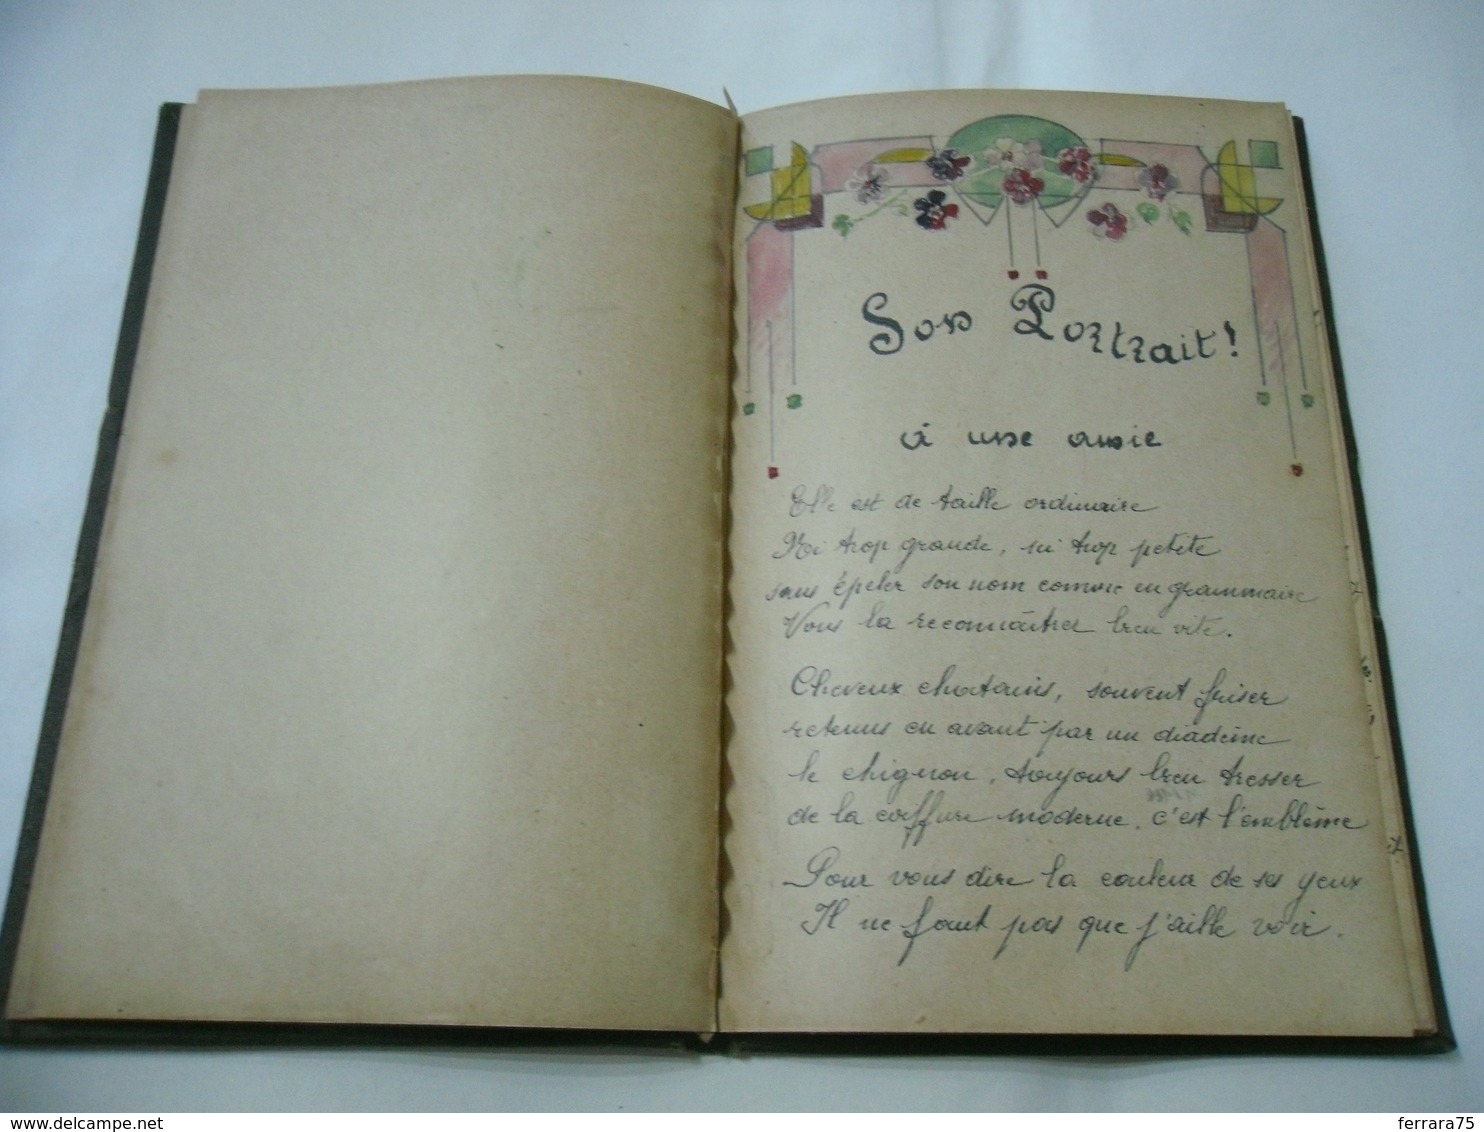 DIARIO DI POESIE D'AMORE AMOUR IN LINGUA FRANCESE FRENCH CON DISEGNI 1911.